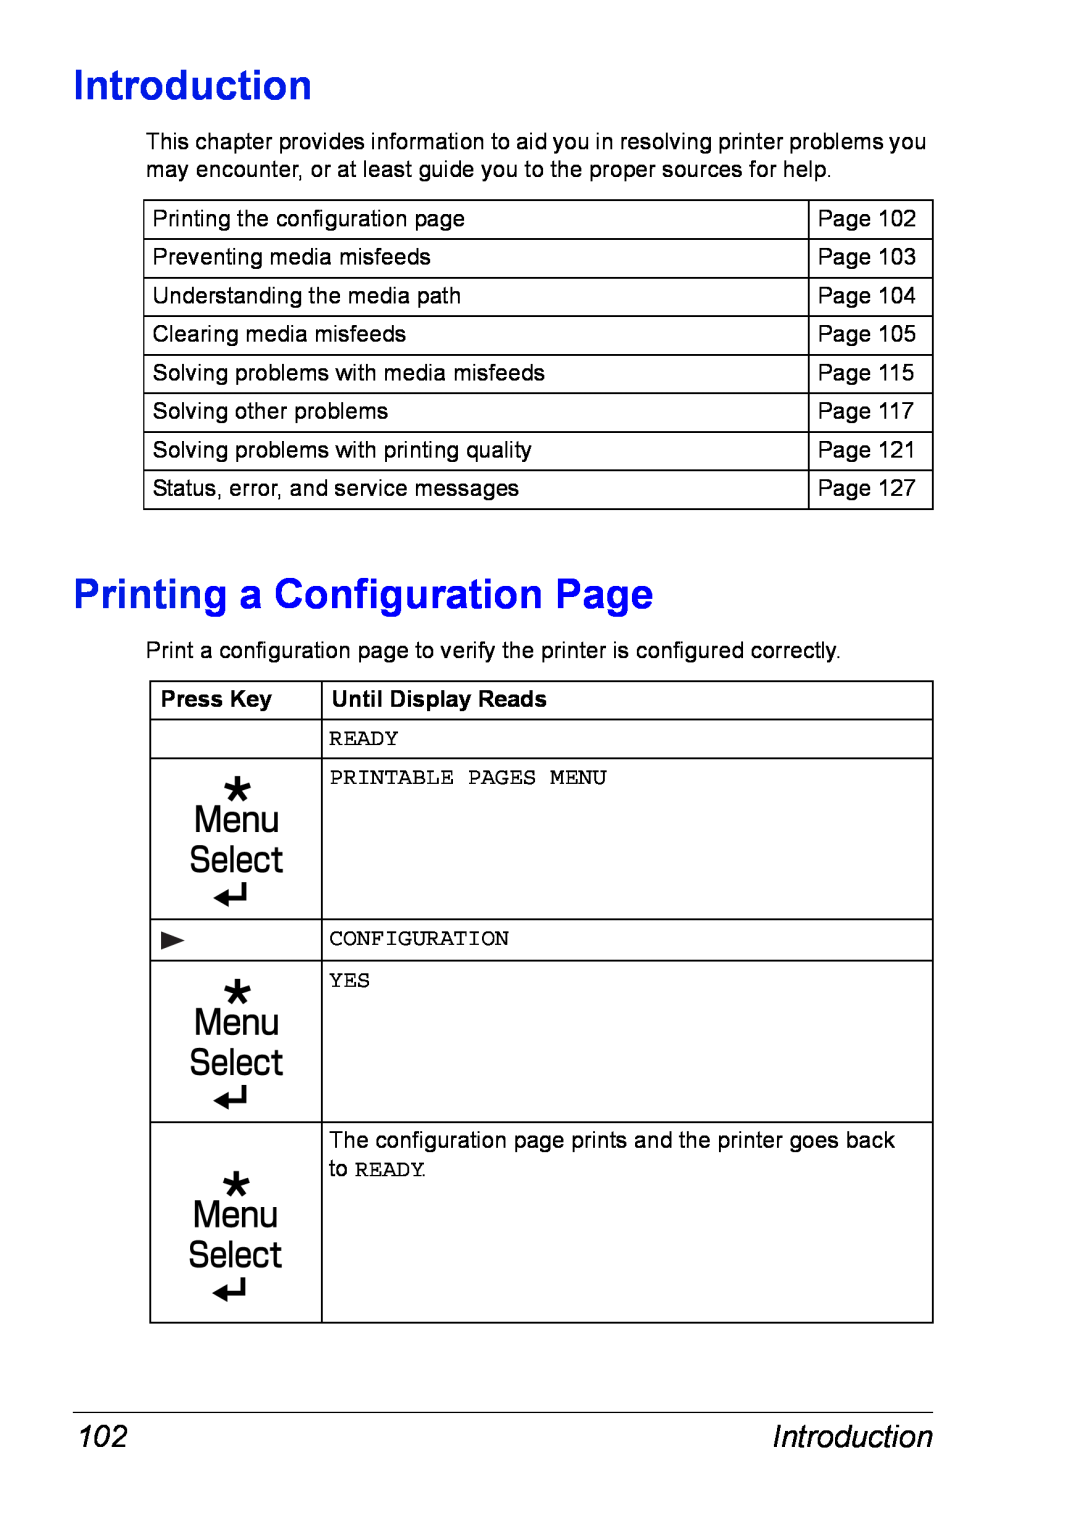 Xerox 6120 manual Introduction, Printing a Configuration Page, Ready, Printable Pages Menu 